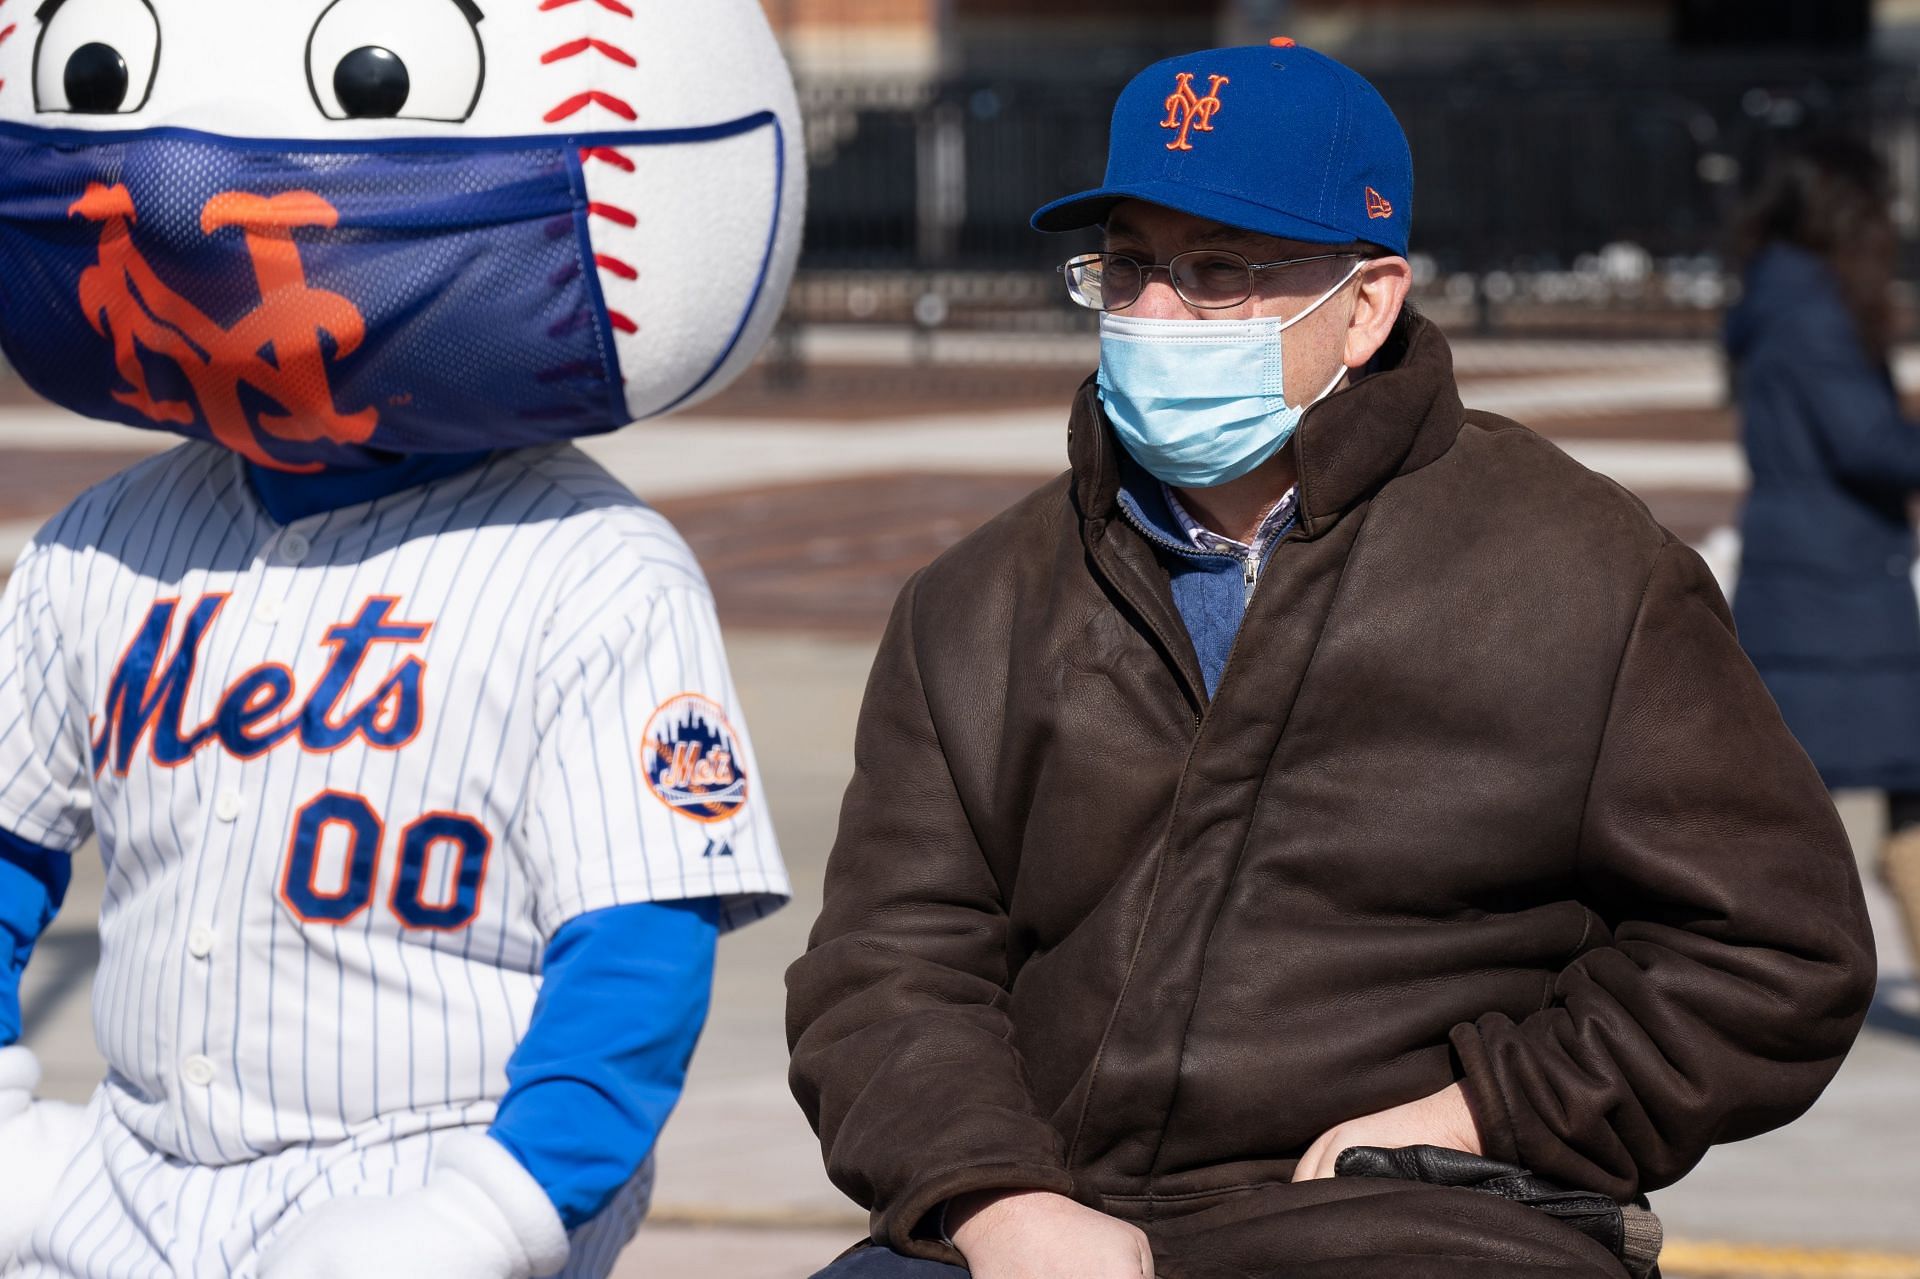 Vaccination Site Opens At Citi Field In New York City